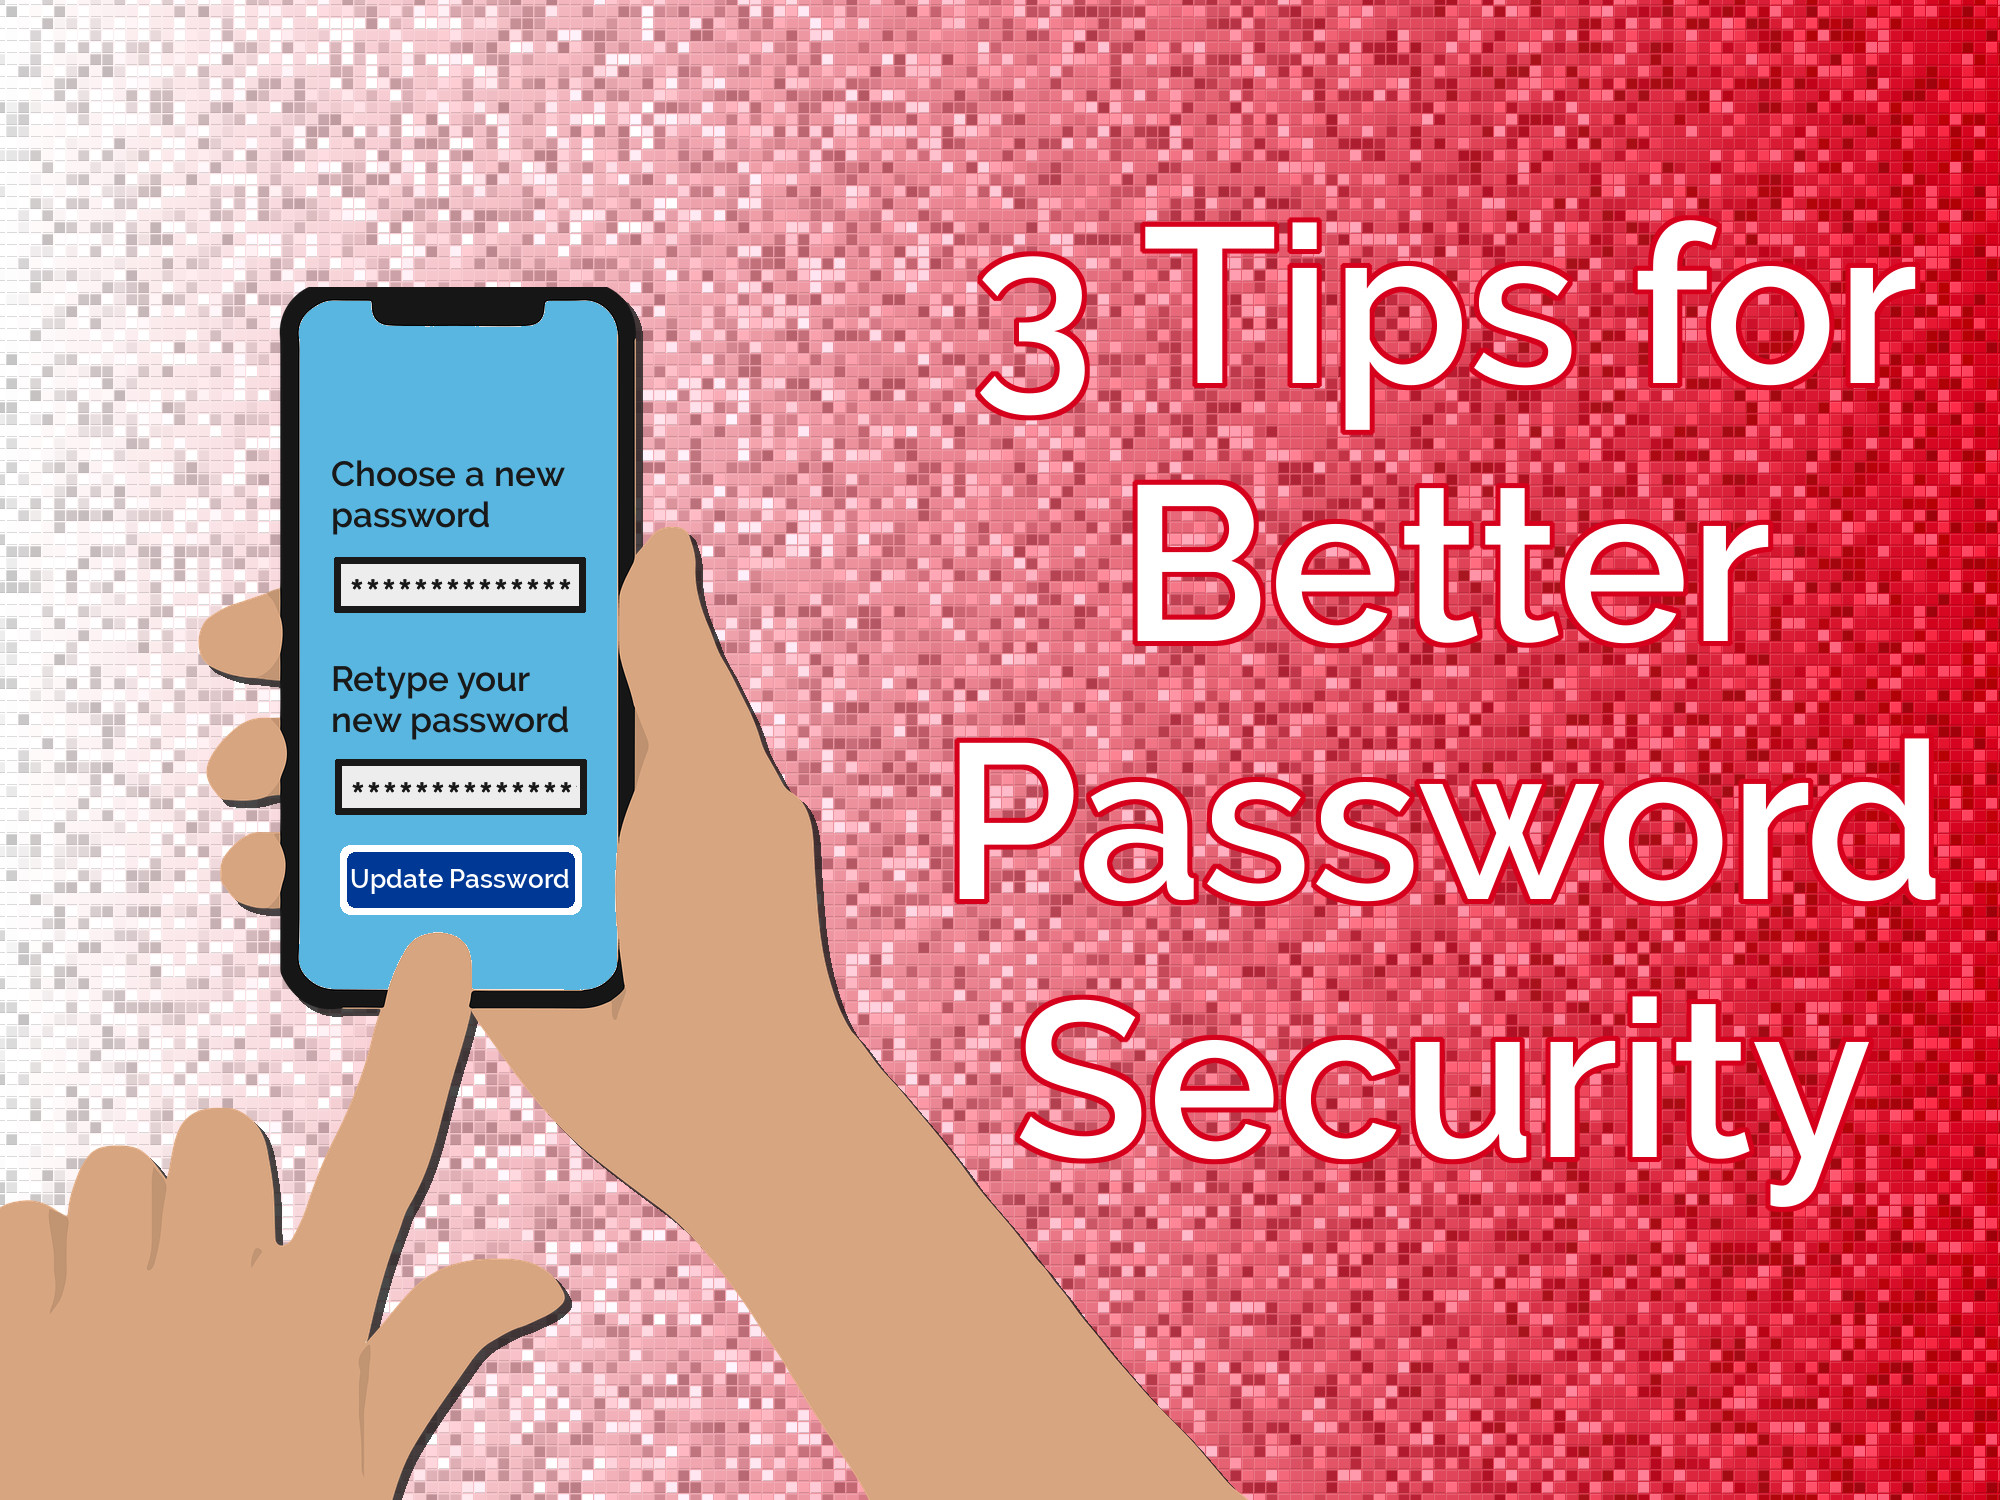 3 Tips for Better Password Security next to an image of a hand holding a phone, with a screen that says Choose a new password, retype your new password, and update password.